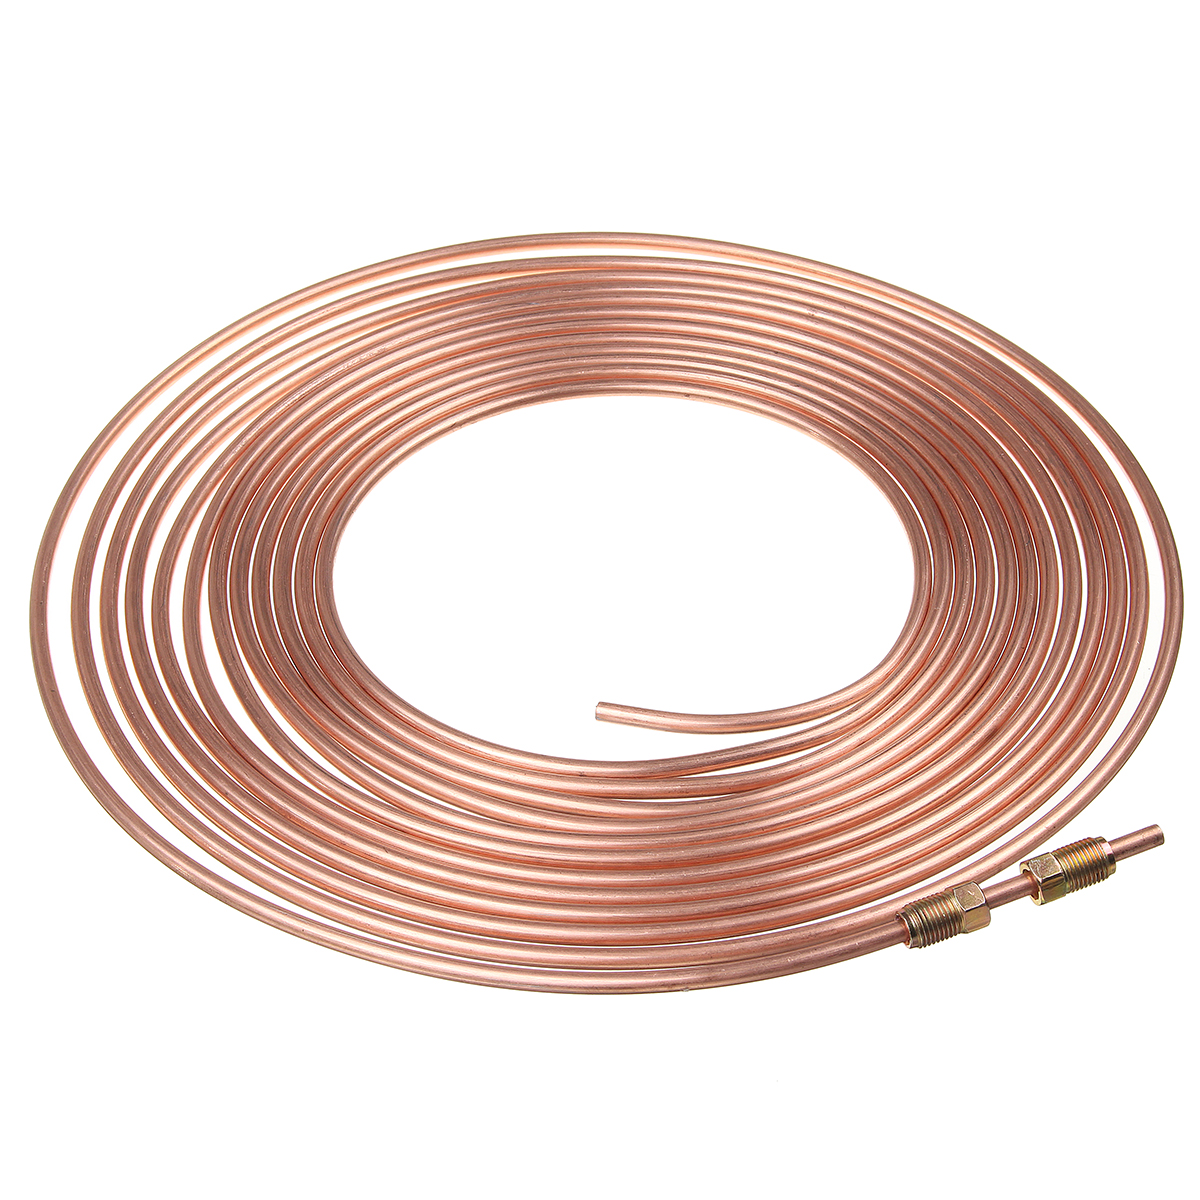 Roll-Copper-Steel-25-ft-316quot-Brake-Line-Pipe-Tubing-with-20-Pcs-Kit-Fittings-Brake-Female-Male-Nu-1543212-7